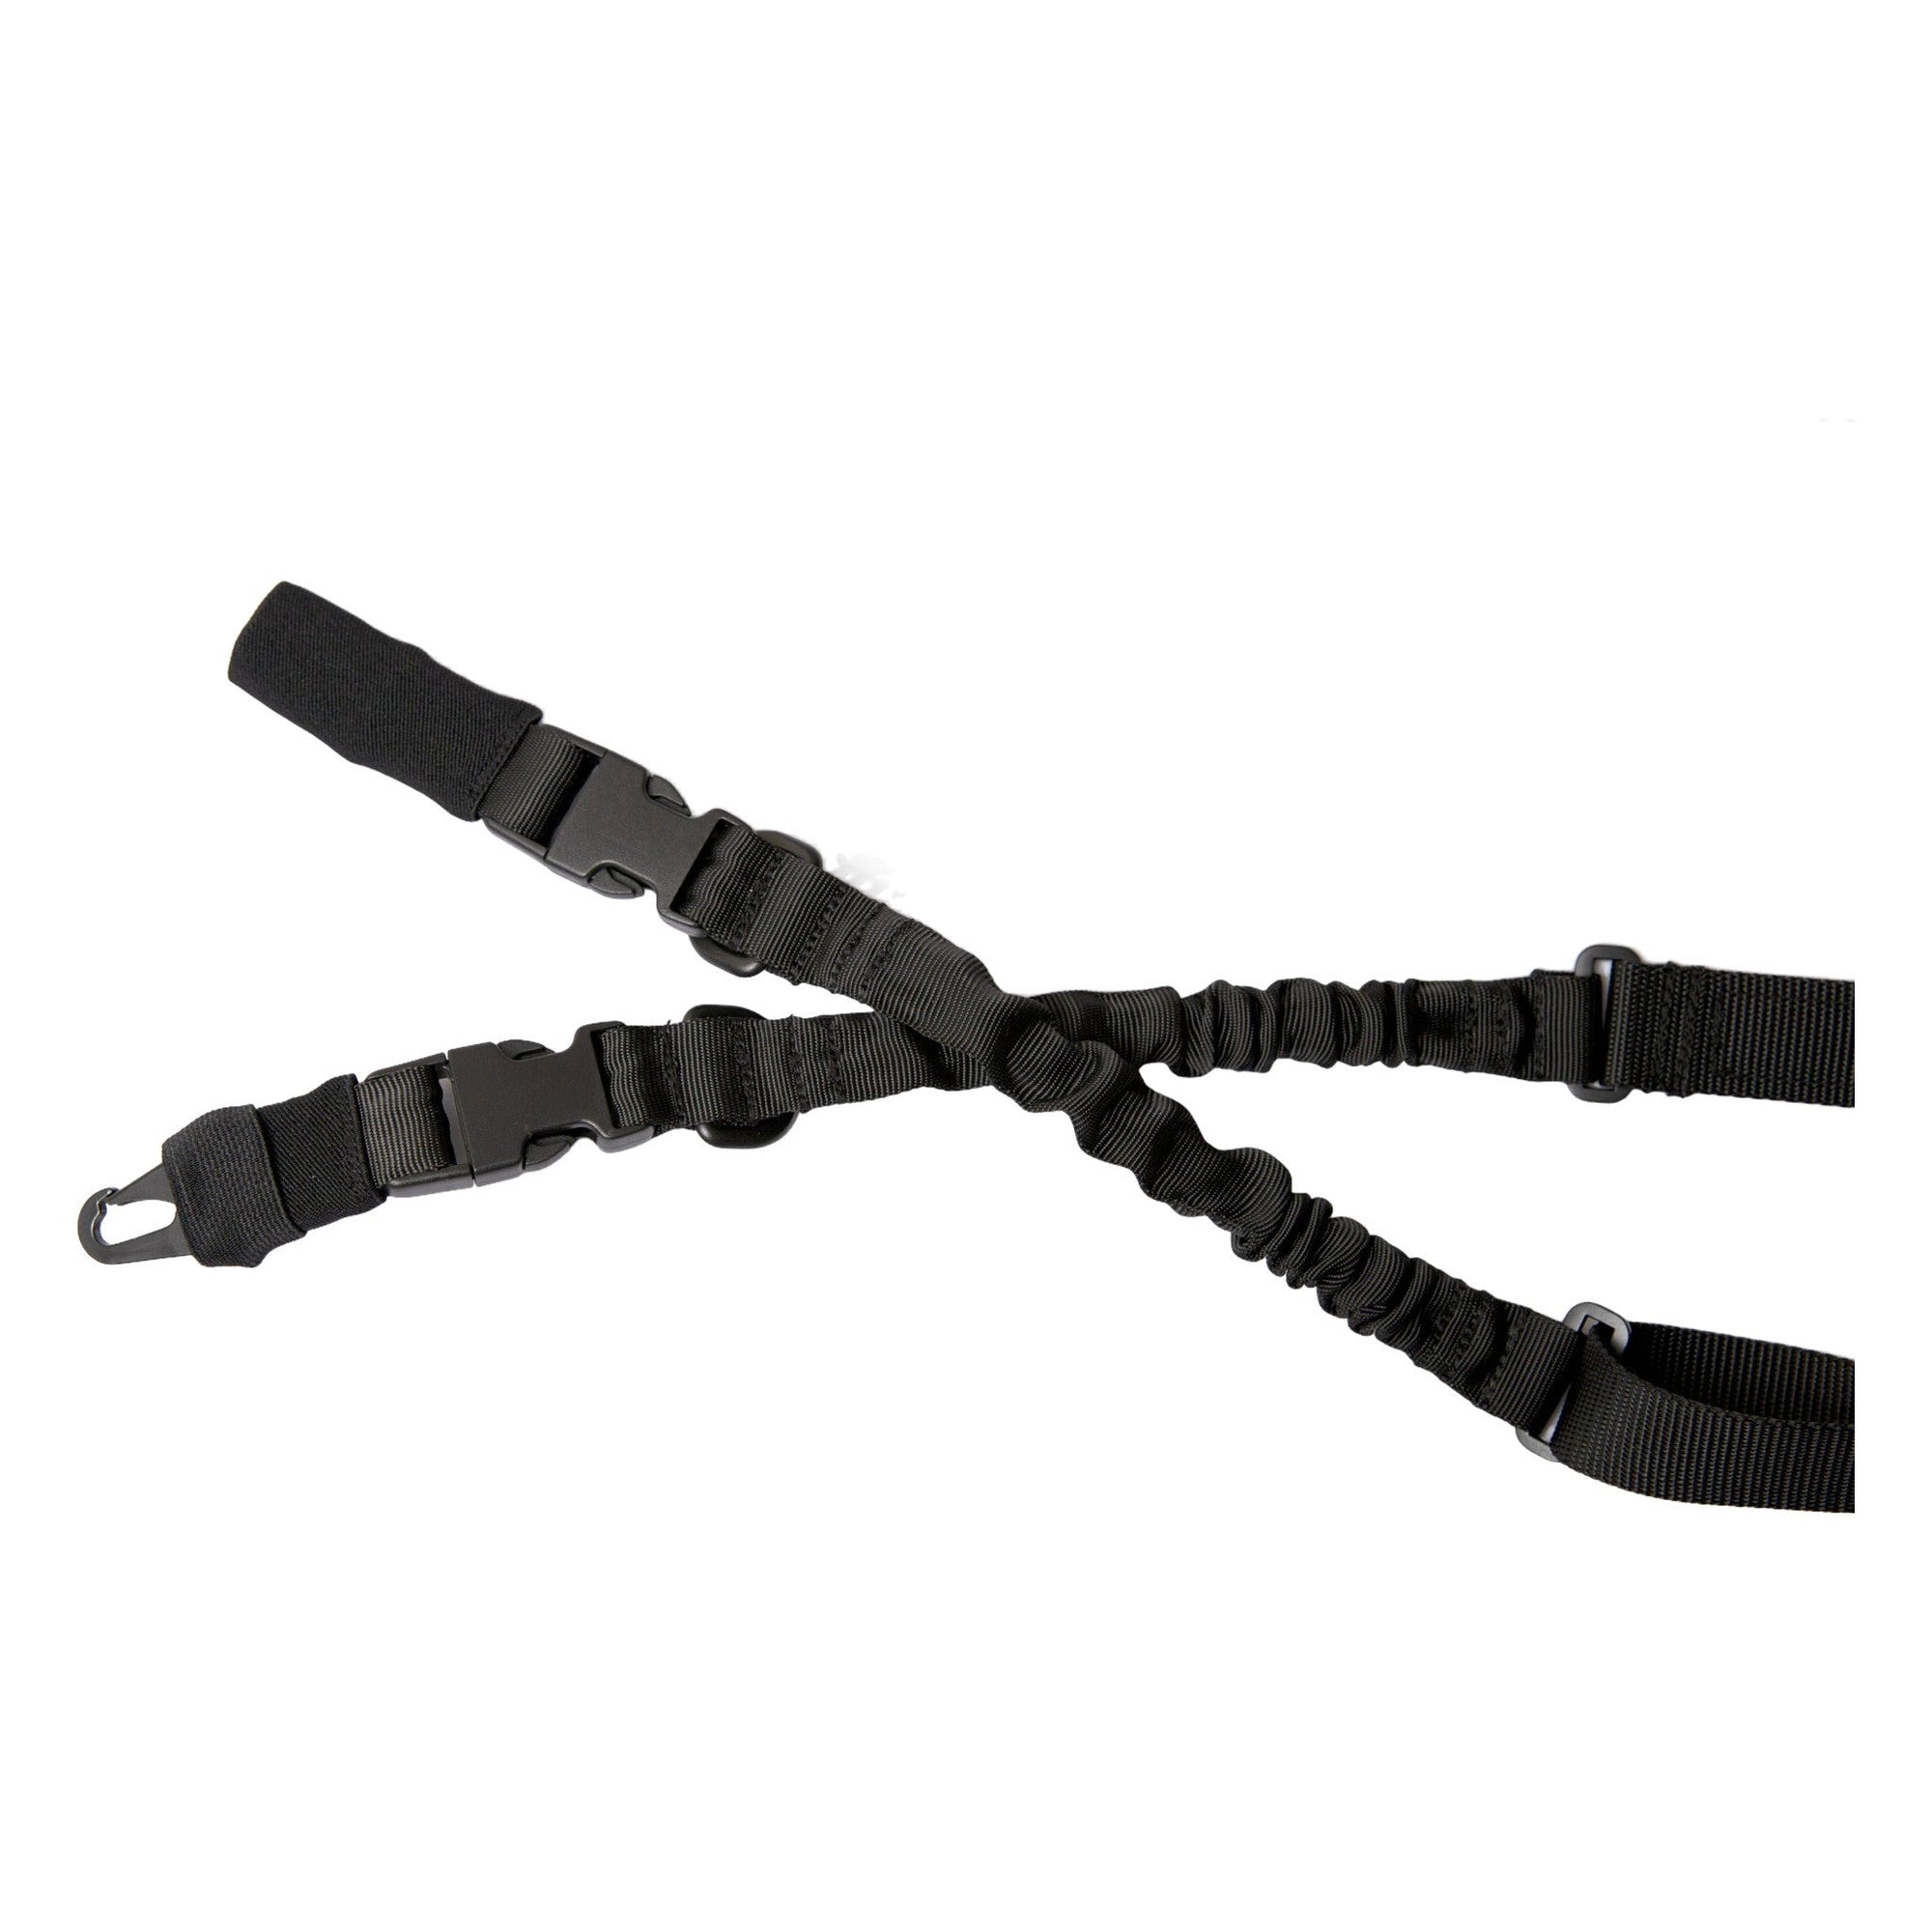 2 Point CBT Bungee Sling